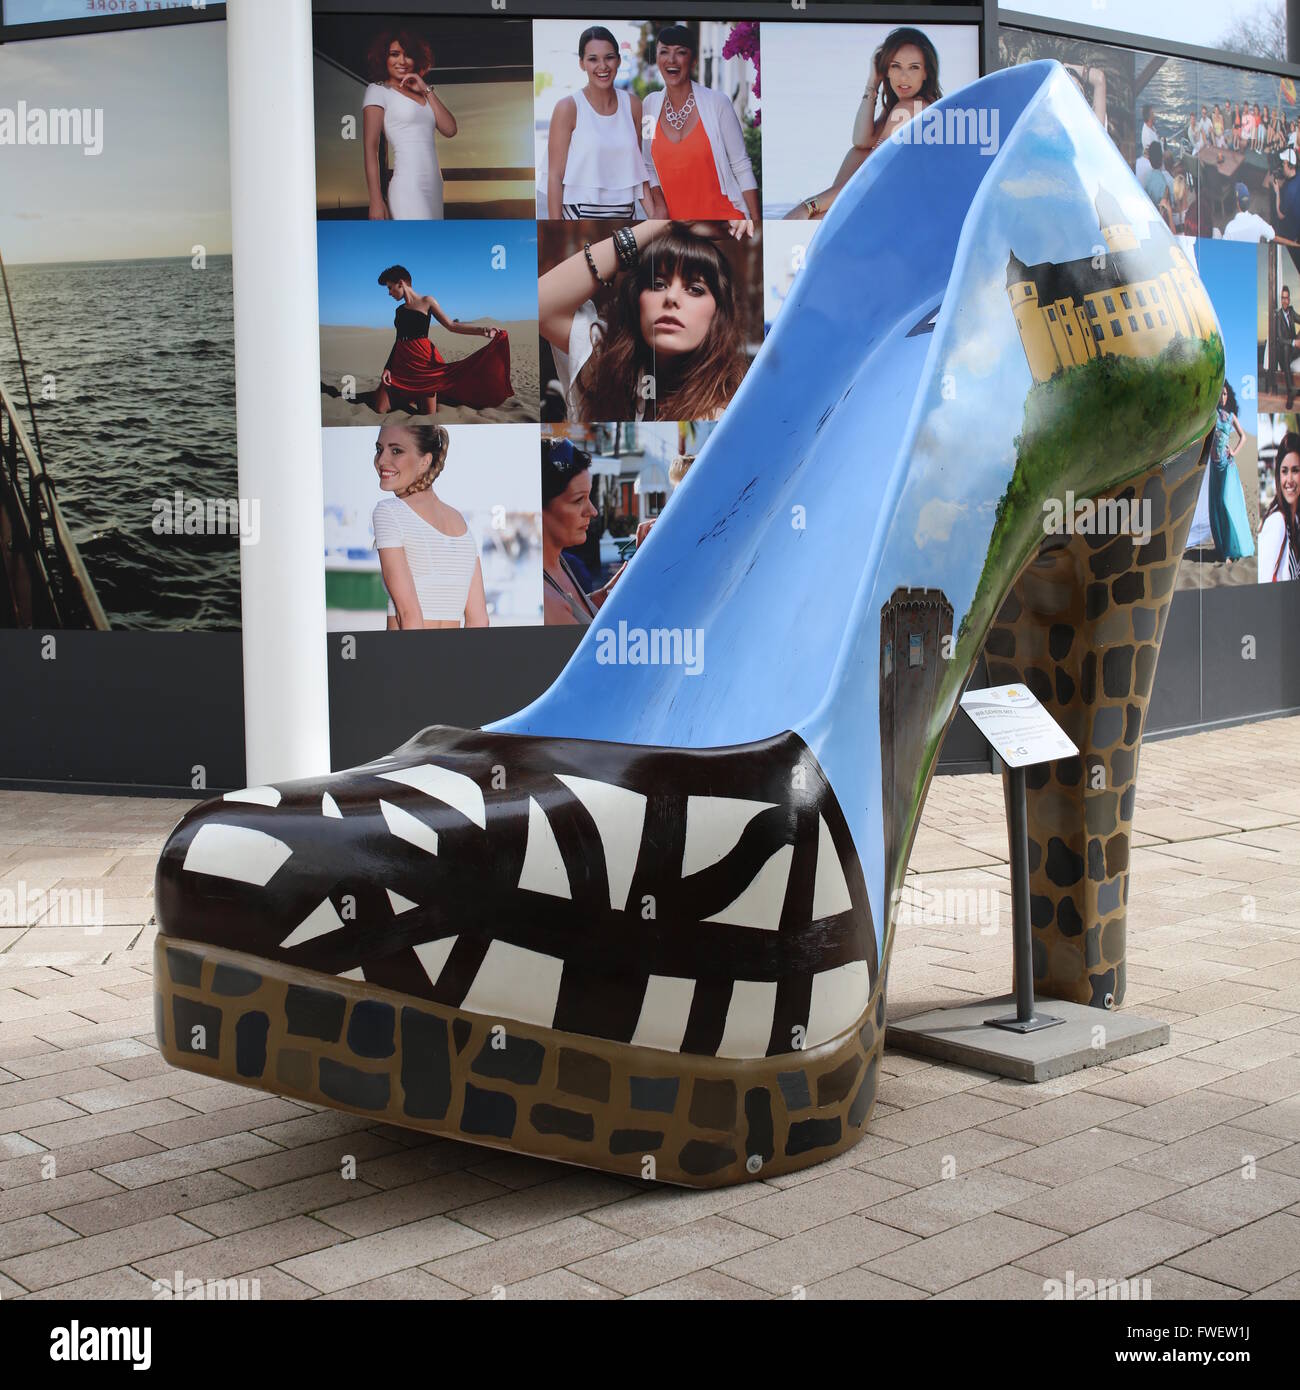 Montabaur Monstiletto, oversized high heel, EU size 302, right shoe, city art outside lead to the new fashion outlet Stock Photo